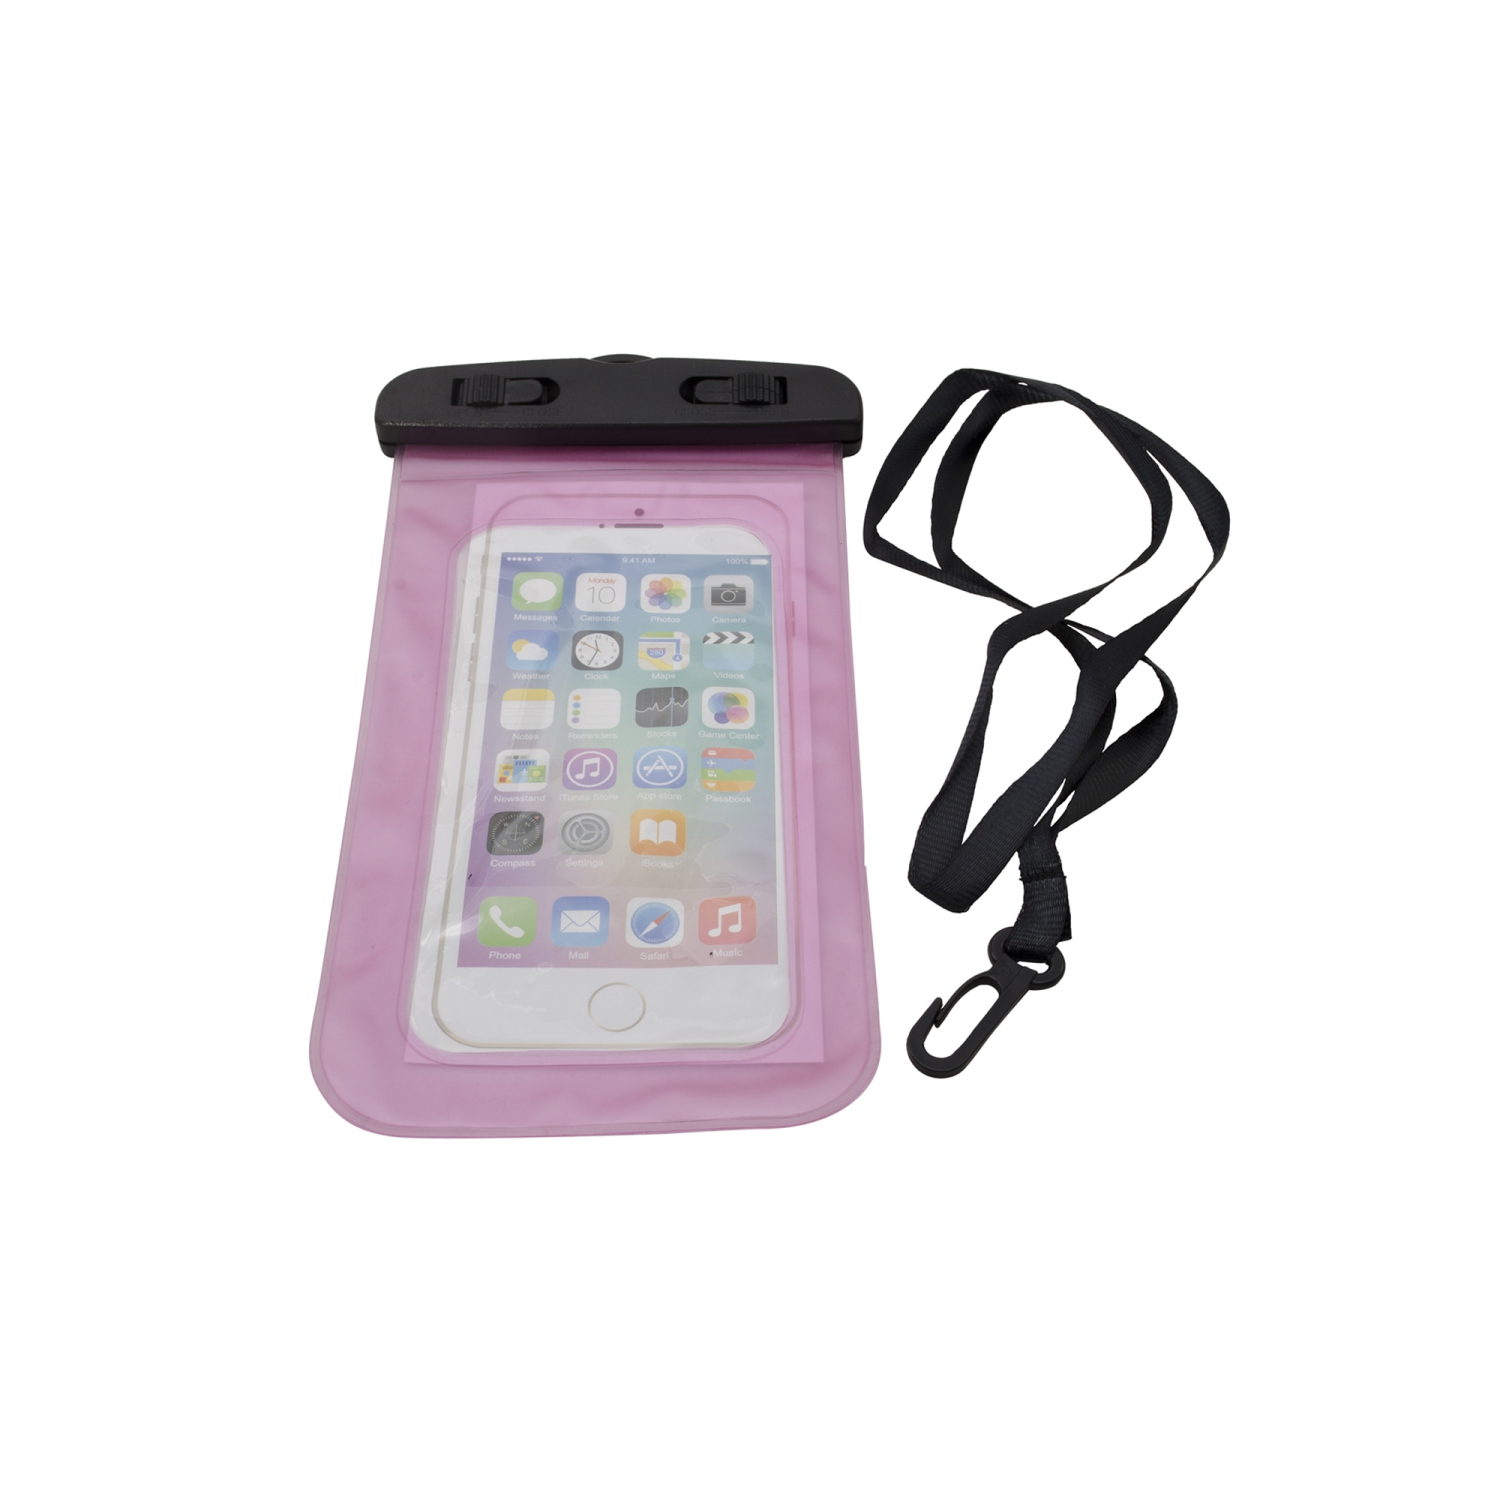 Universal Waterproof Underwater Pouch Dry Bag Case Cover Cell Phone Swimming Bag Fits Most Mobile Phones - Pink